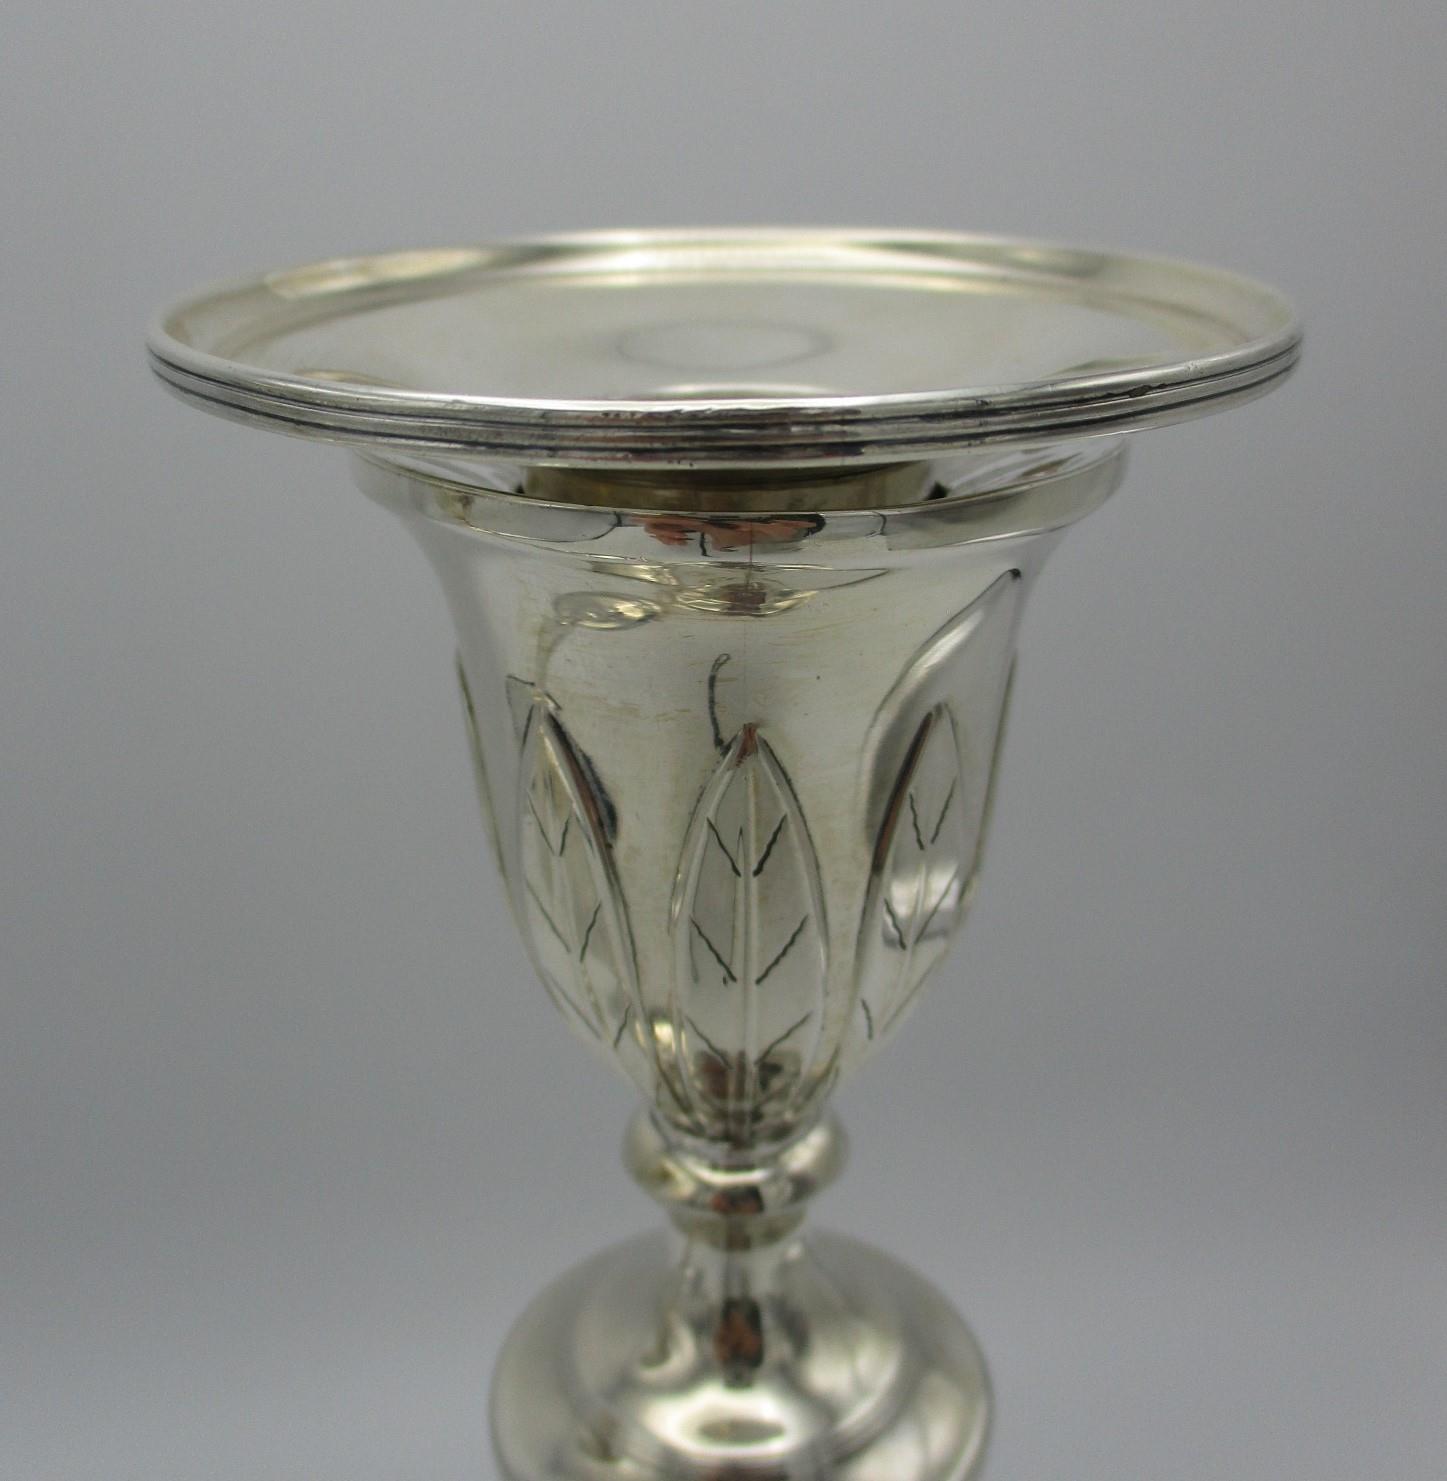 A pair of William IV silver candlesticks by John Green & Co, Sheffield 1834, in the Georgian taste - Image 5 of 8